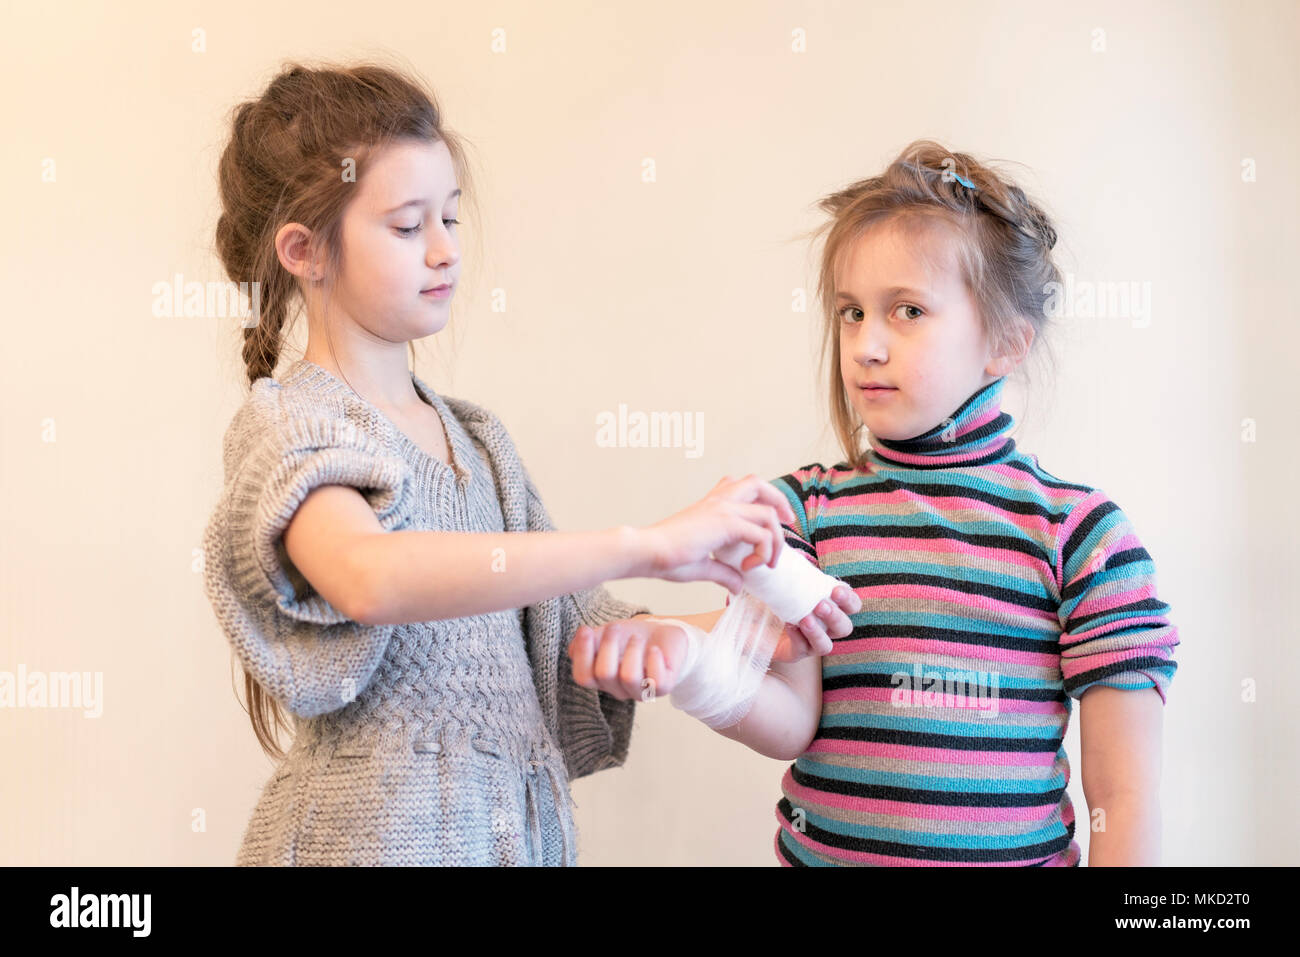 The Girl Bending Her Sister S Hand Two Girls Play Doctor Bandage